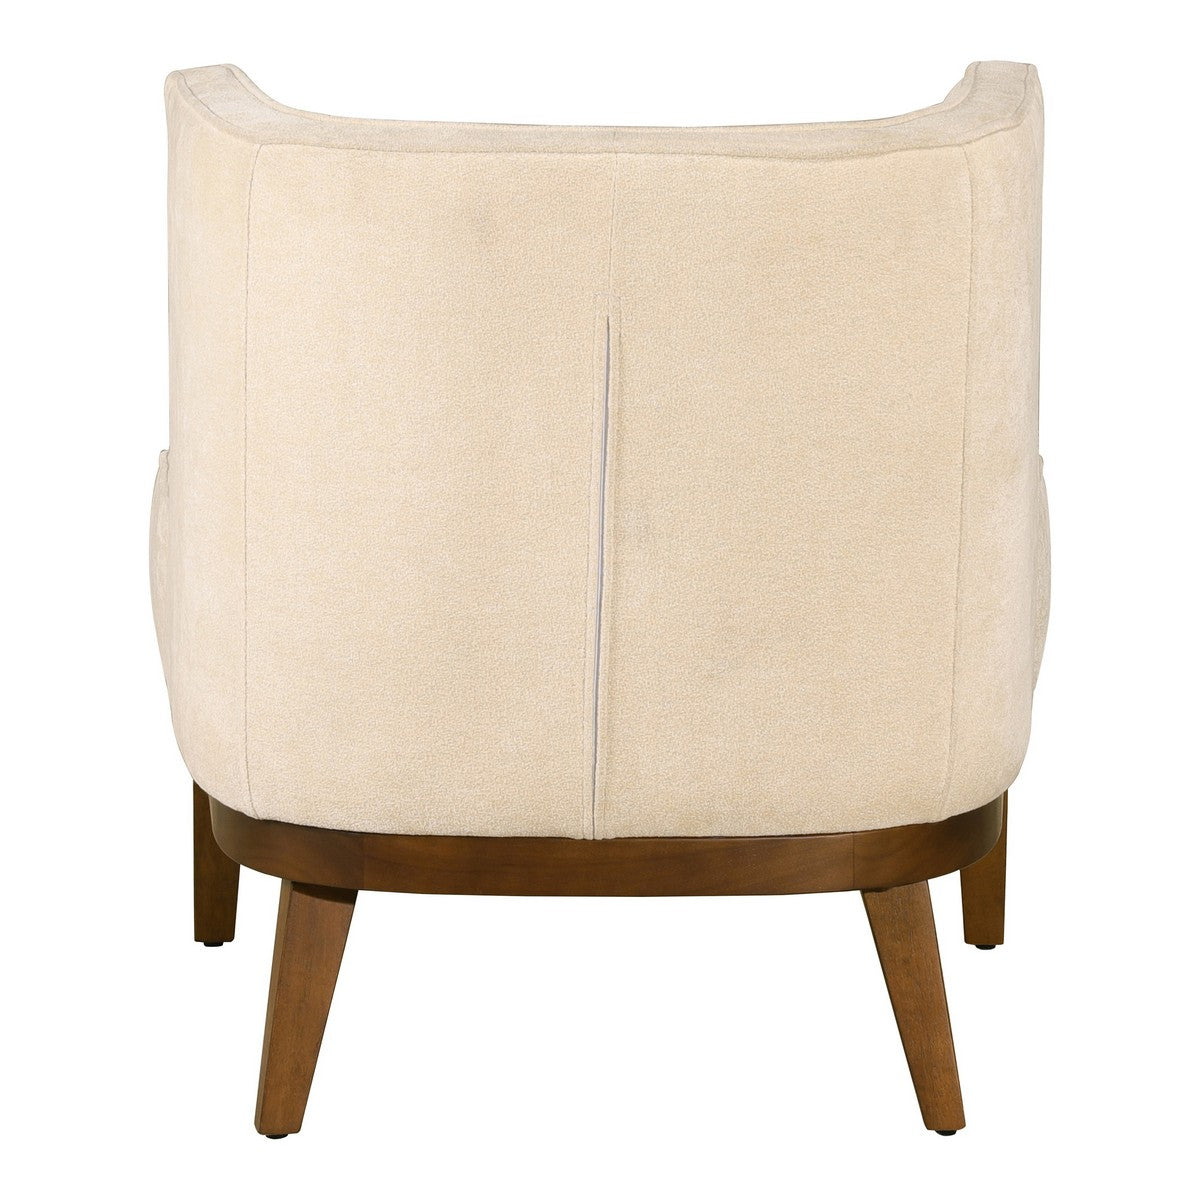 Moe's Home Collection Daniel Chair Beige - RN-1141-34